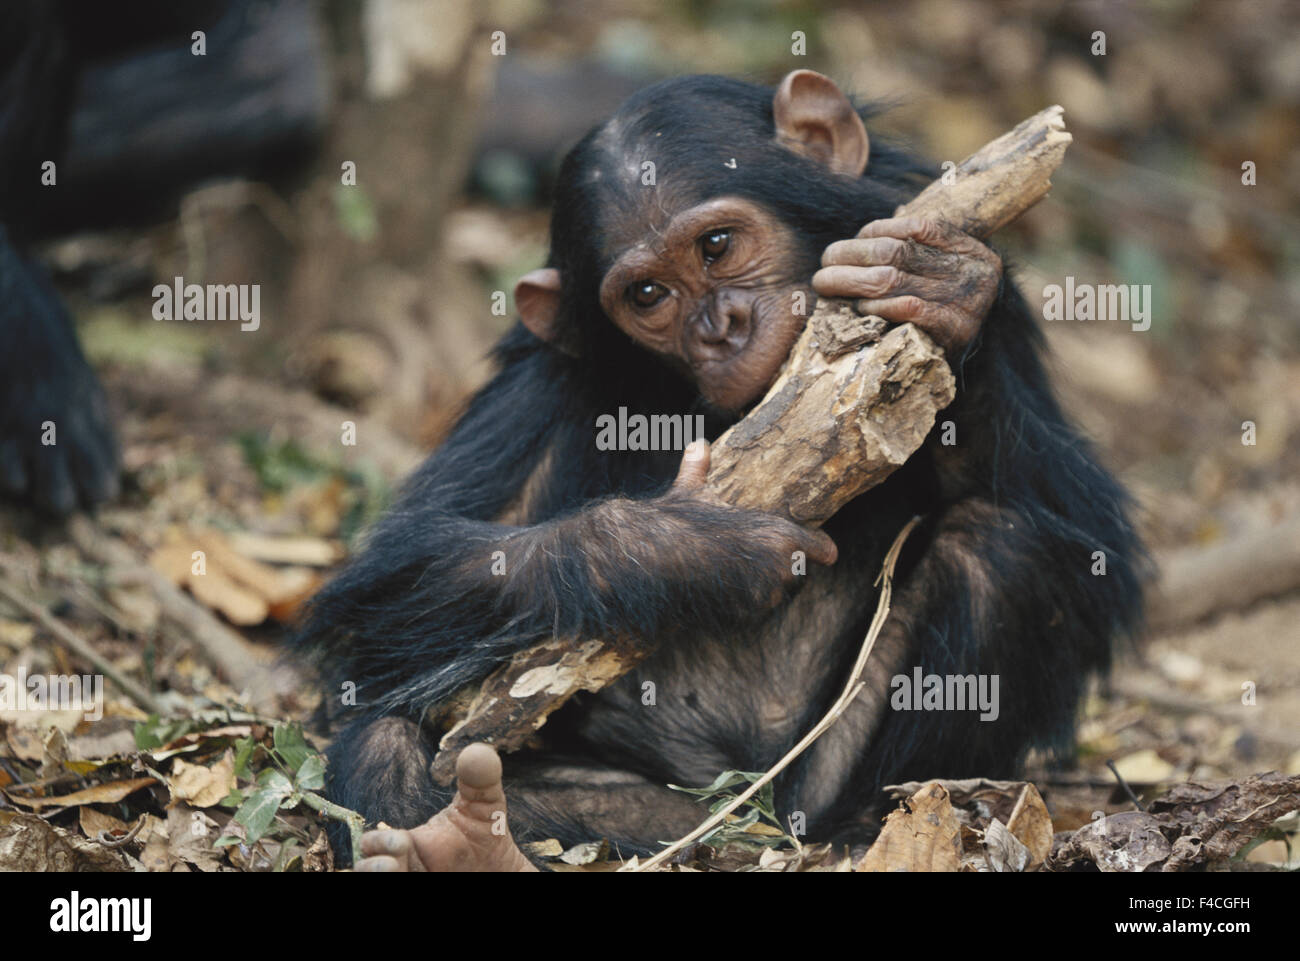 Tanzania, Gombe Stream National Park, Young animal eating wood. (Large format sizes available) Stock Photo